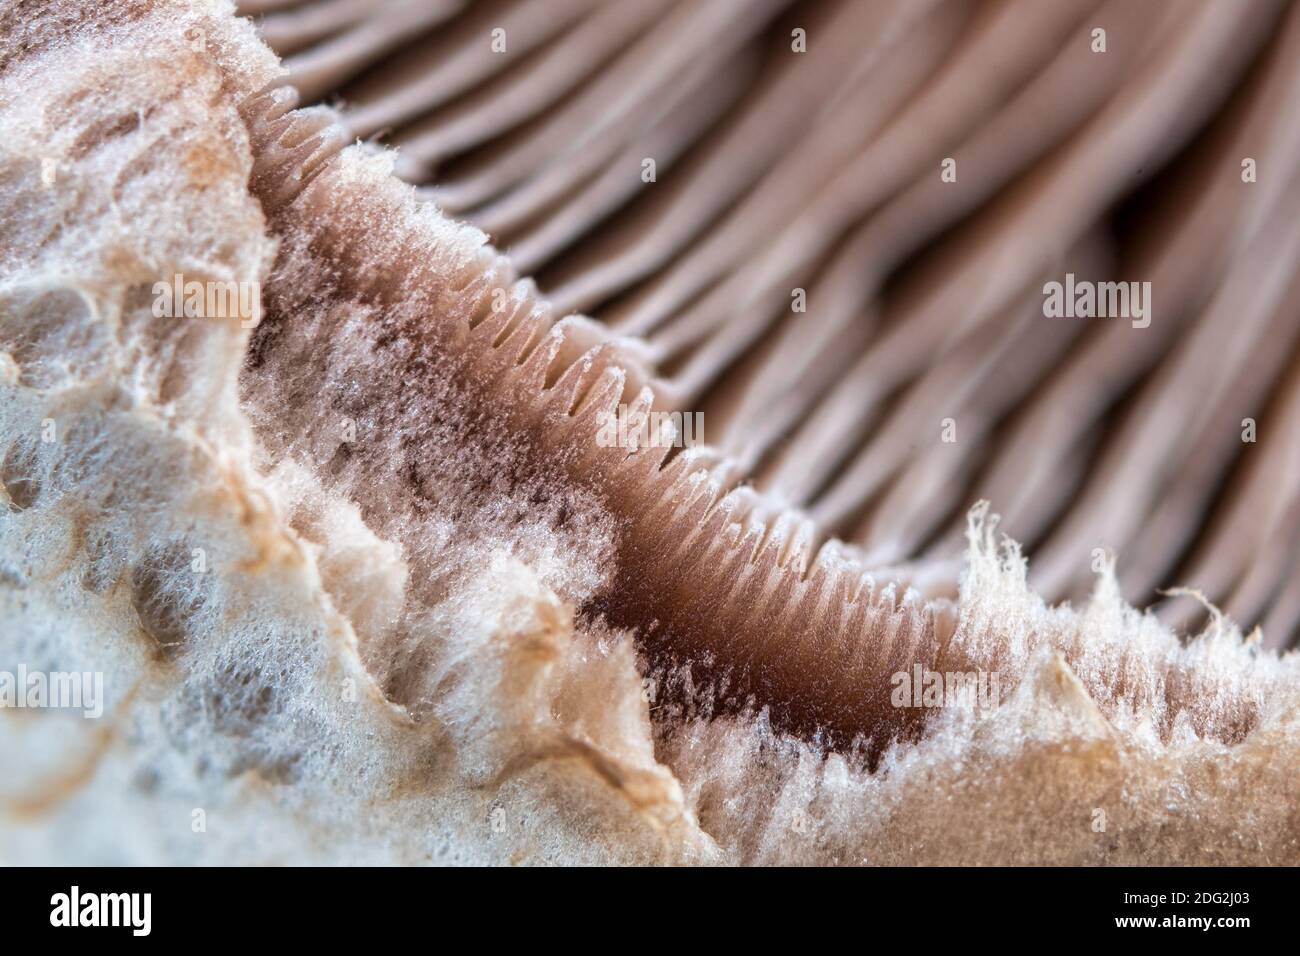 Extreme close-up of a white mushroom showing the beautiful small details of the vegetable food ingredient Stock Photo